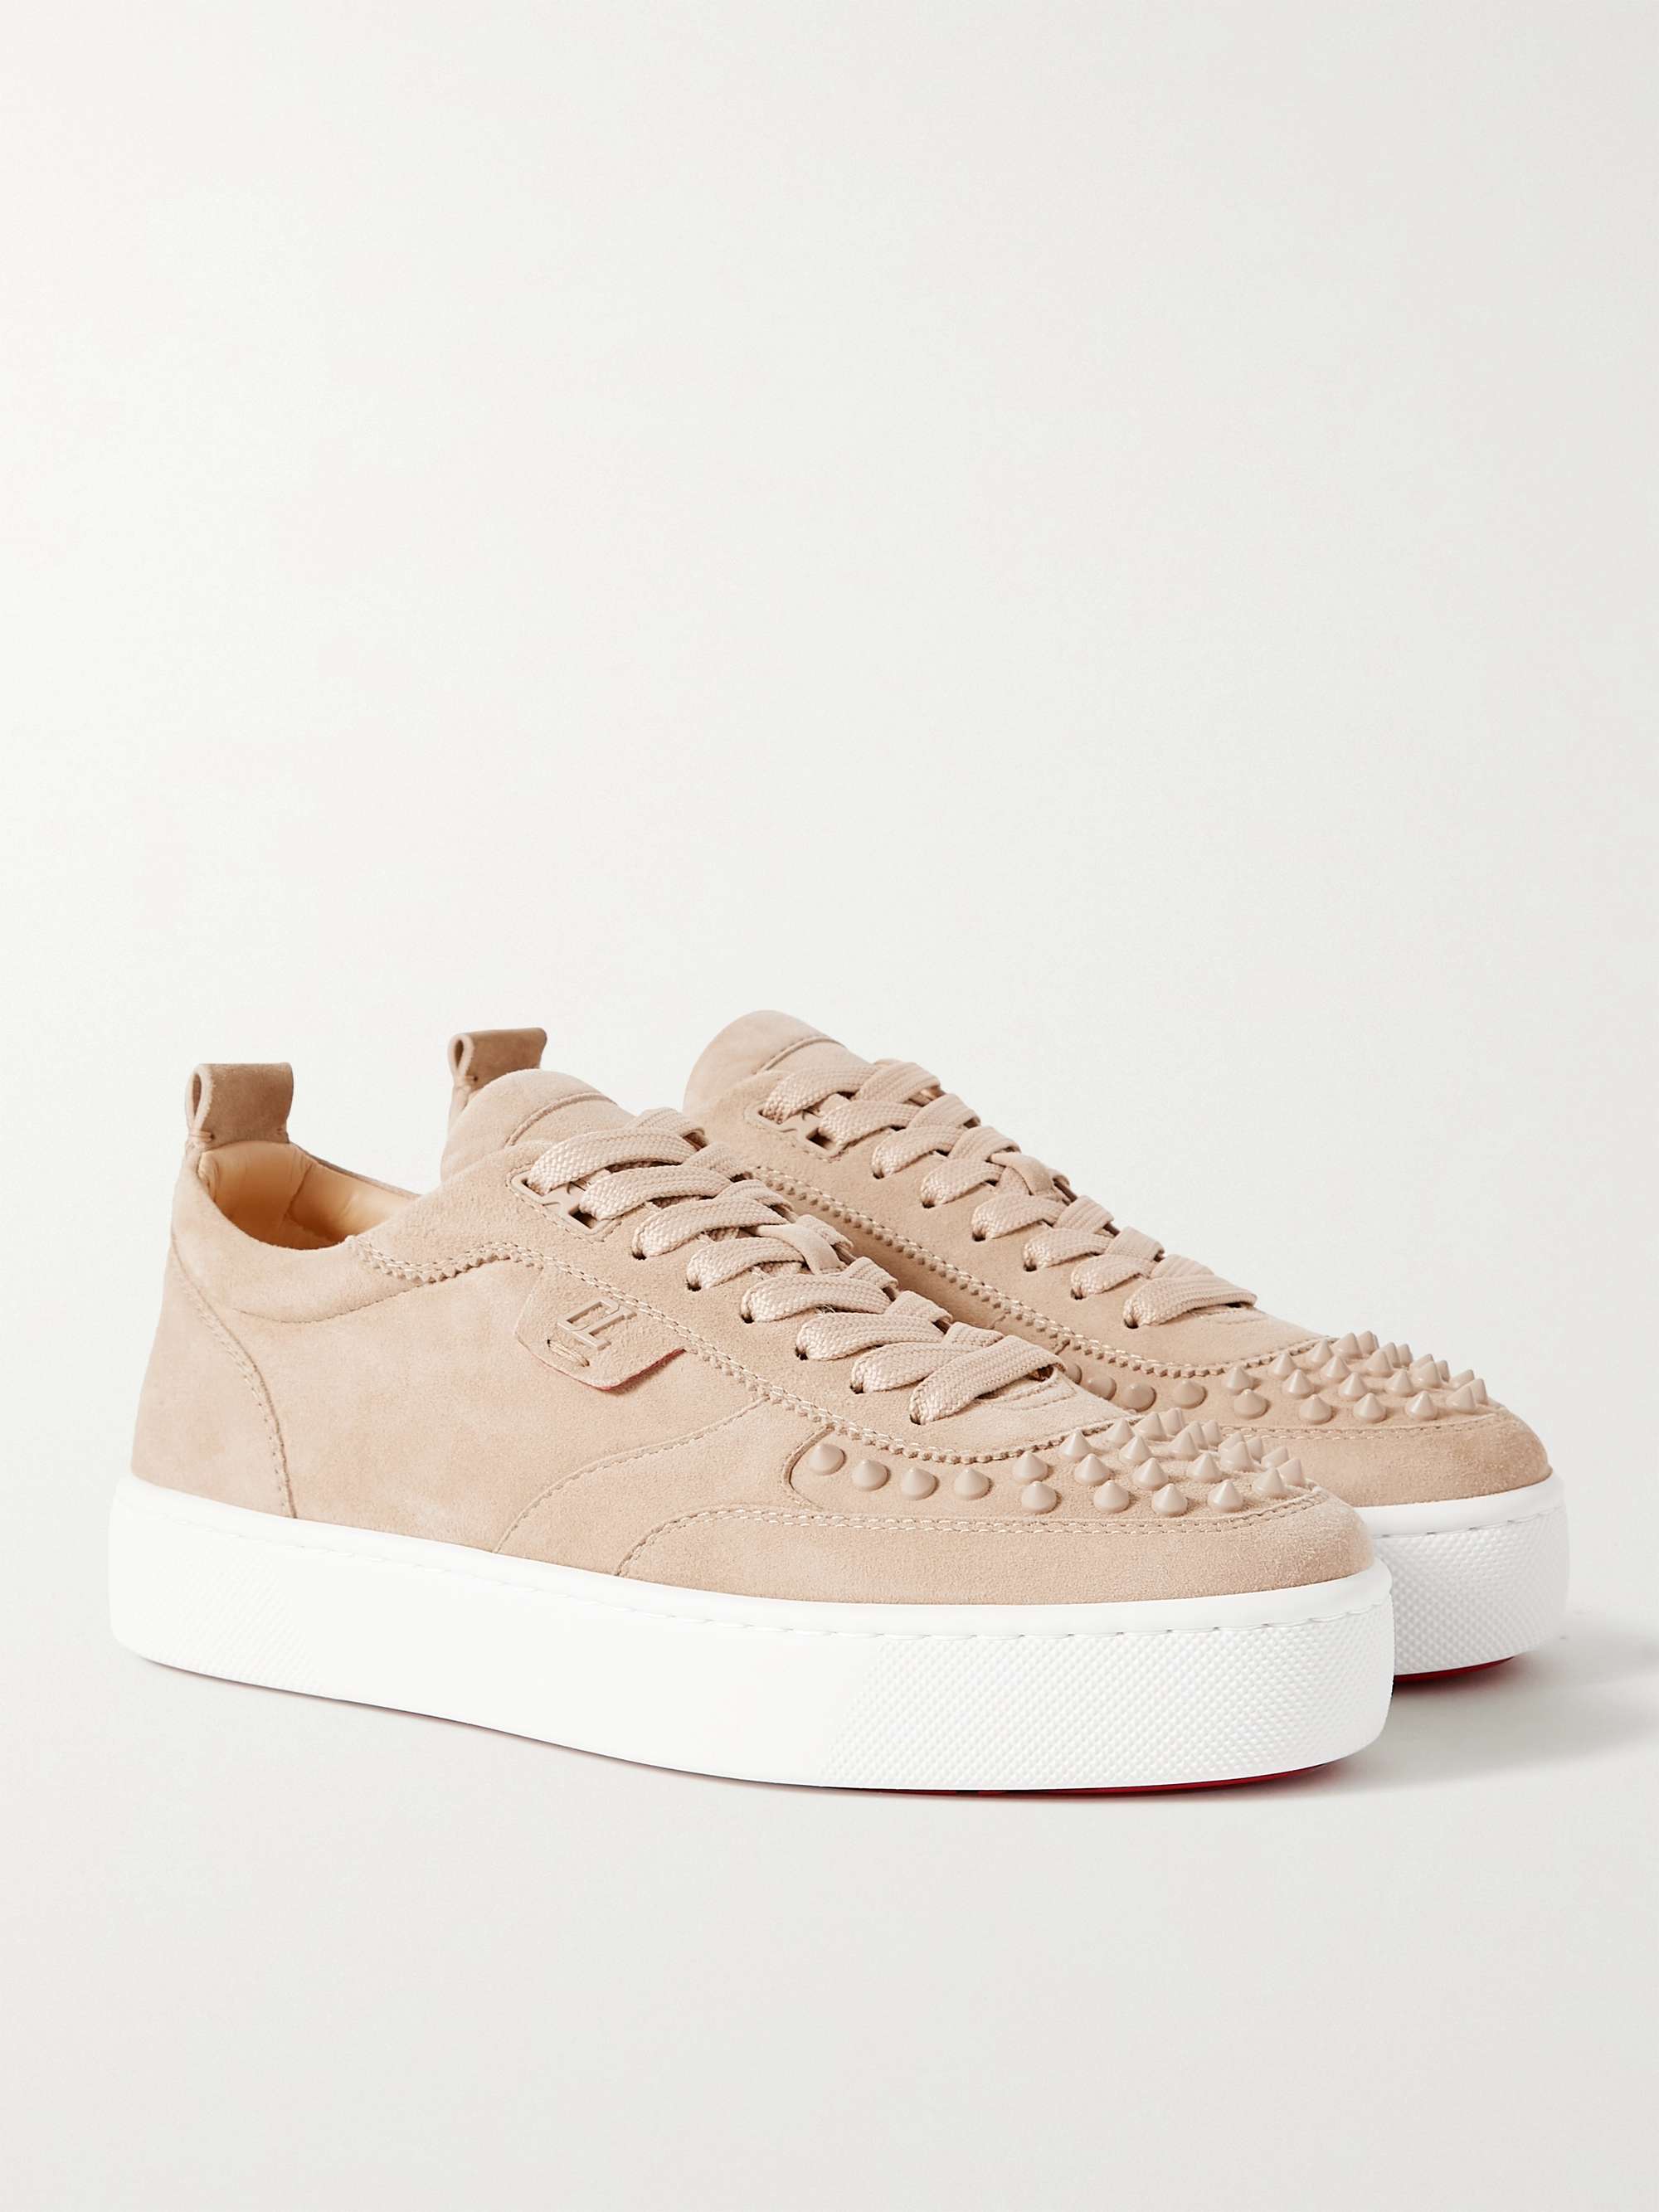 CHRISTIAN LOUBOUTIN Happyrui Spiked Suede Sneakers